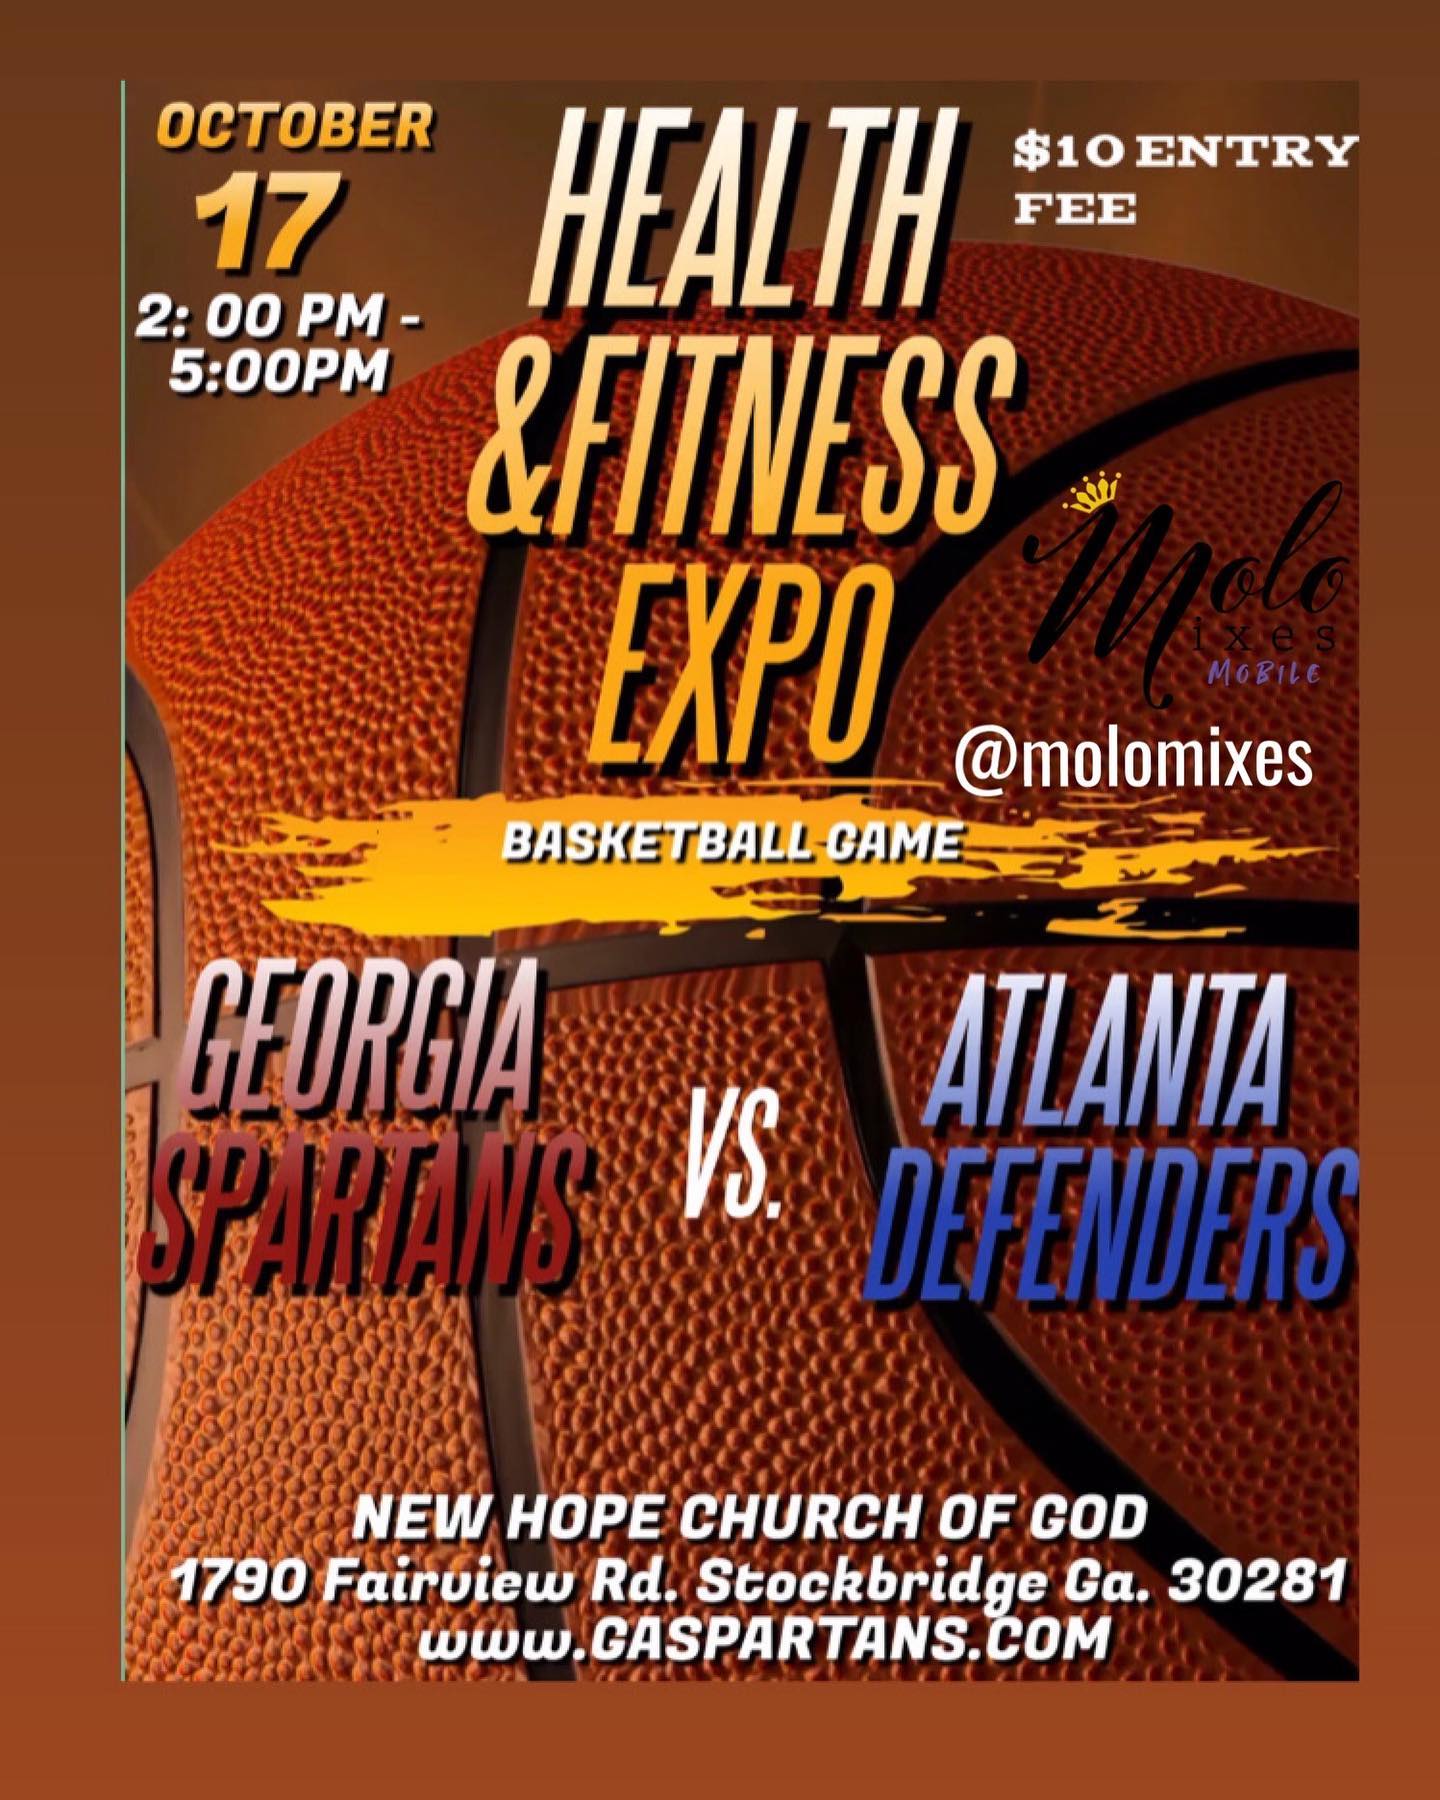 Oct. 17 2pm to 5pm Health&Fitness Expo Basketball Game. @molomixes will be vending !! New Hope Church of God 1790 Fairview Rd.